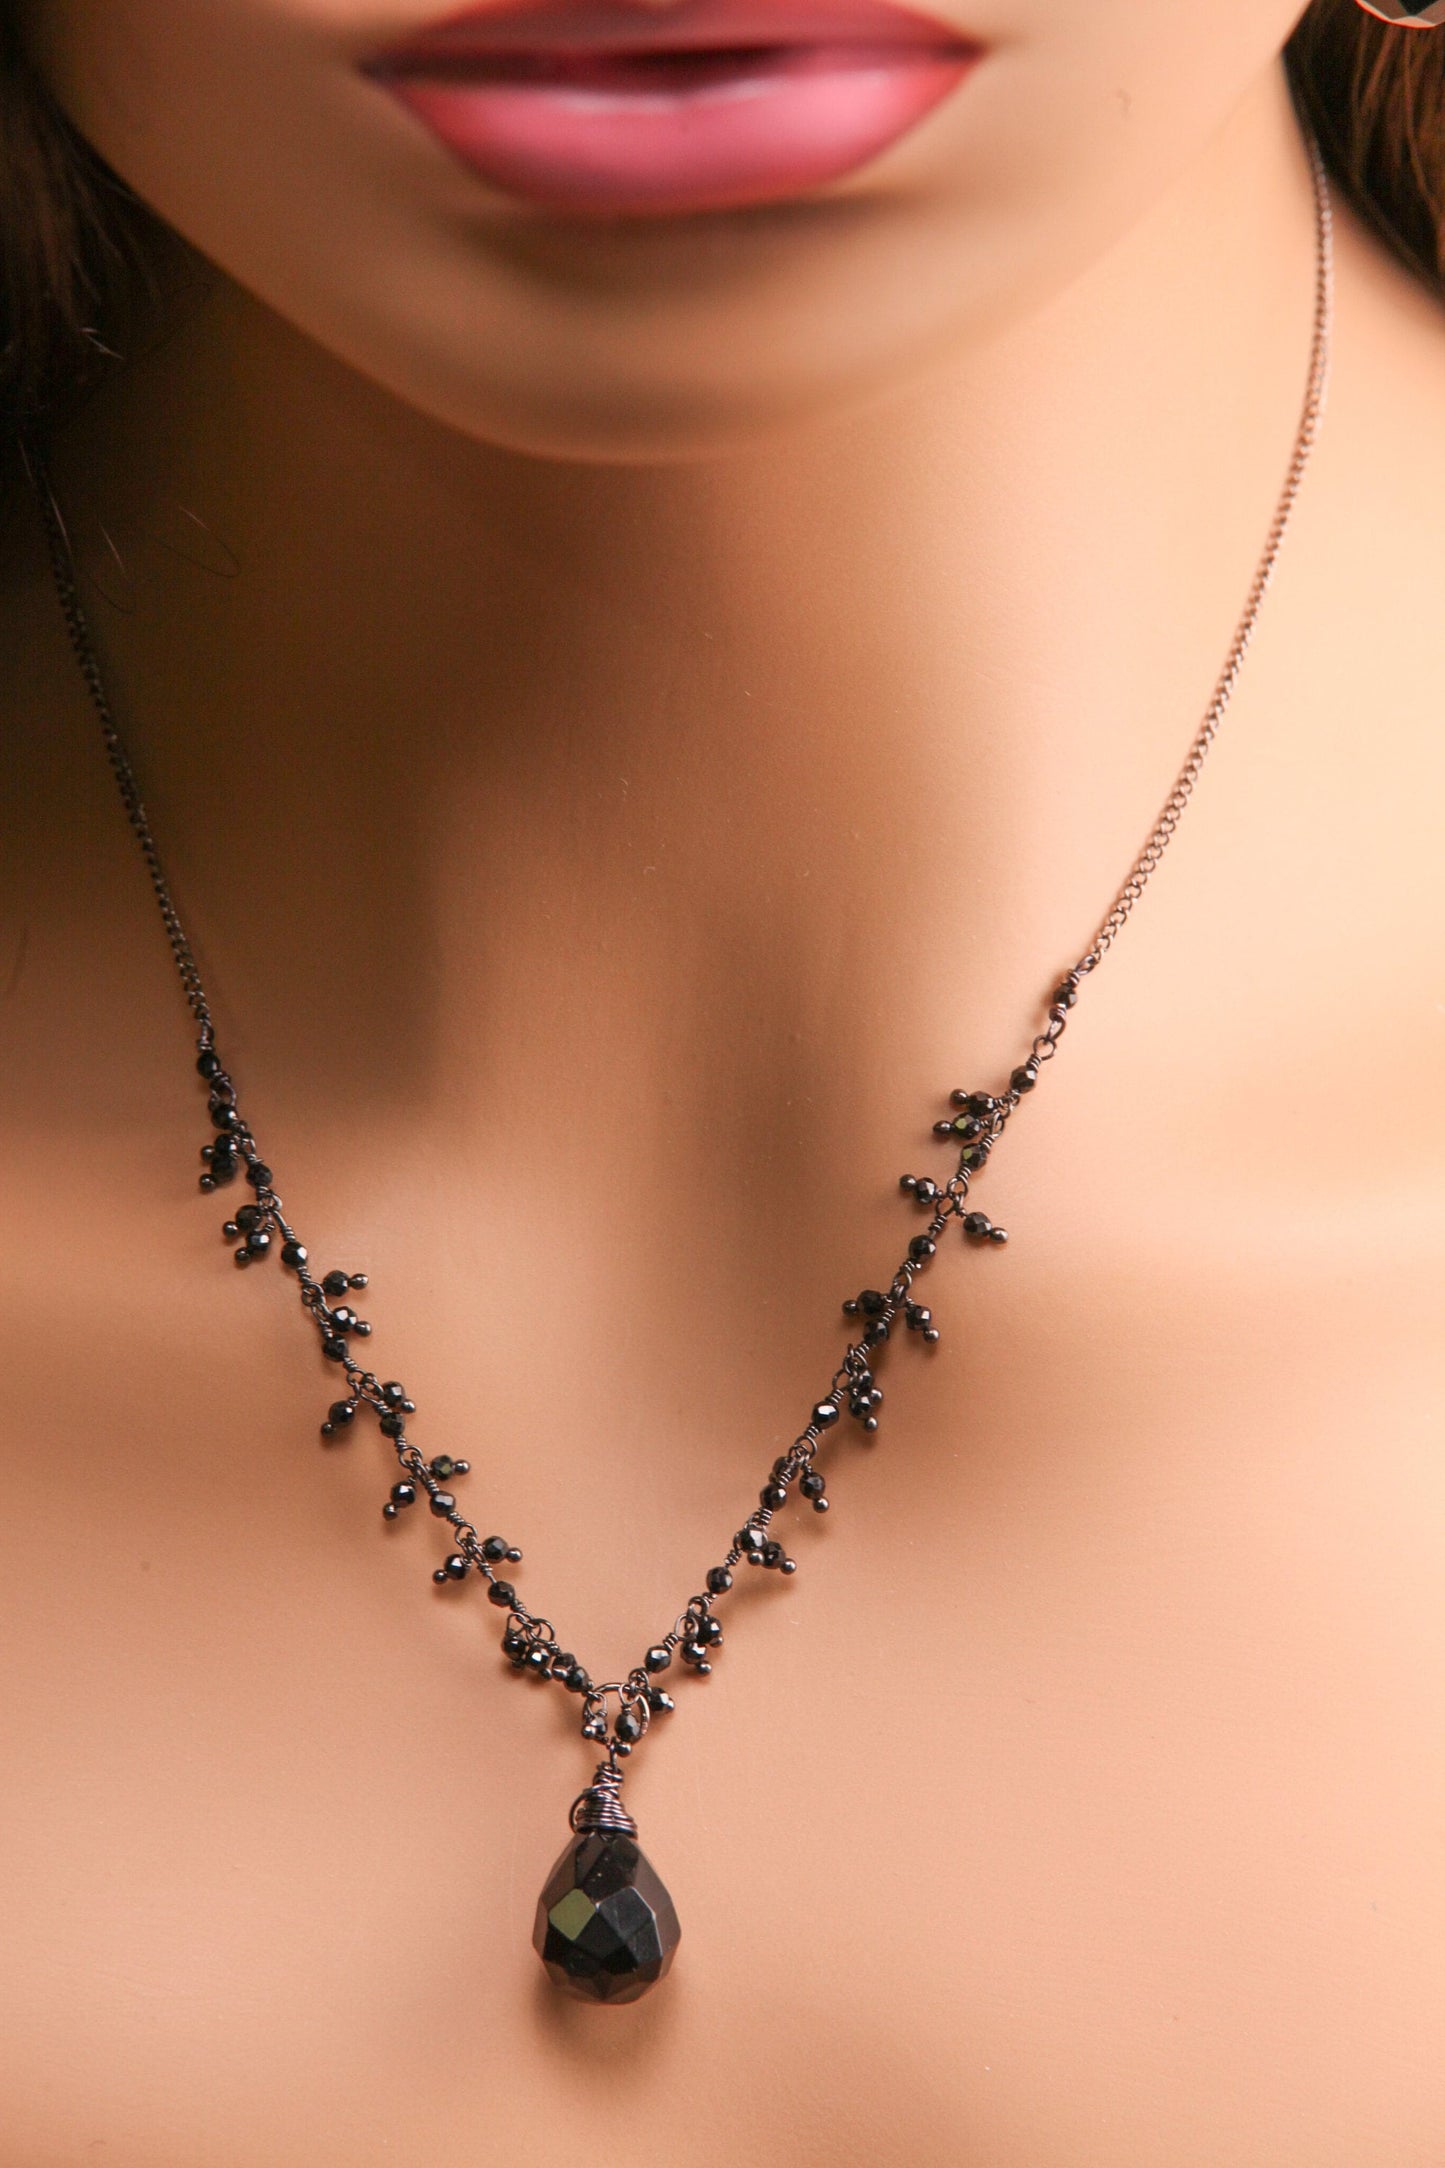 Black Onyx Teardrop Dangling with Black Spinel Clusters Wire Wrapped Necklace, Matching Earrings Jewelry Set Handmade Gift